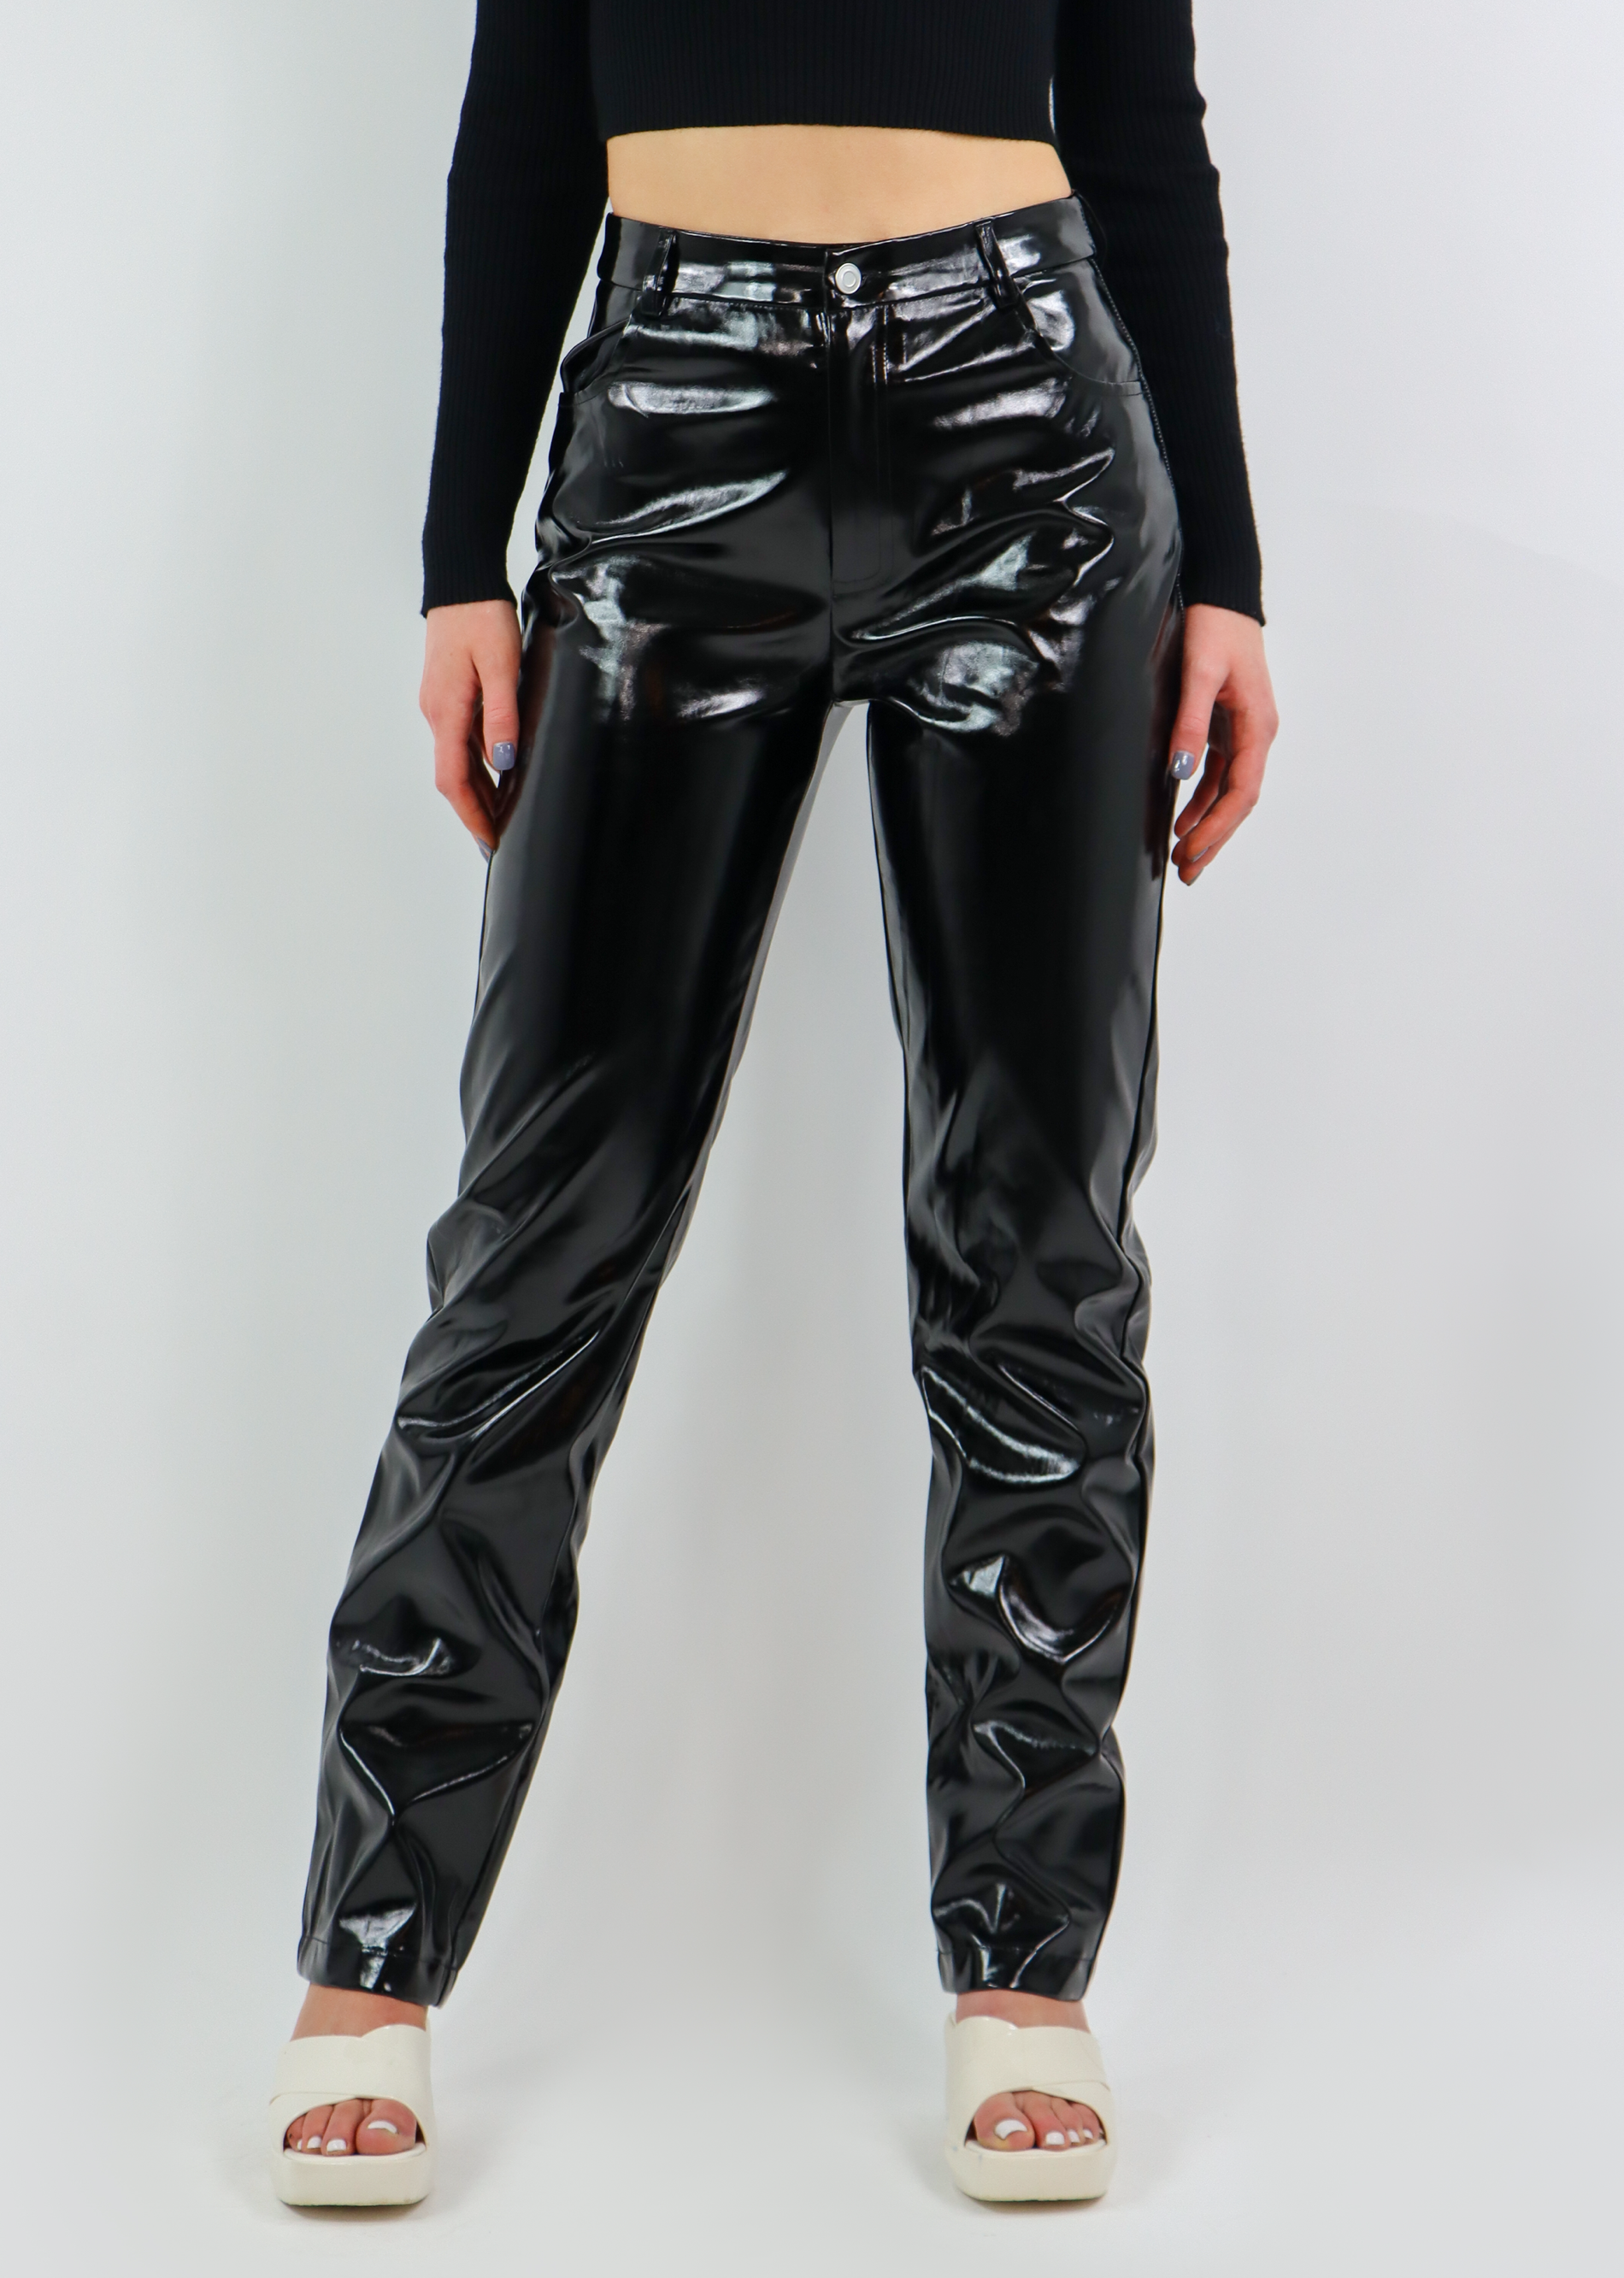 Charmed Patent Leather Pants ★ Black